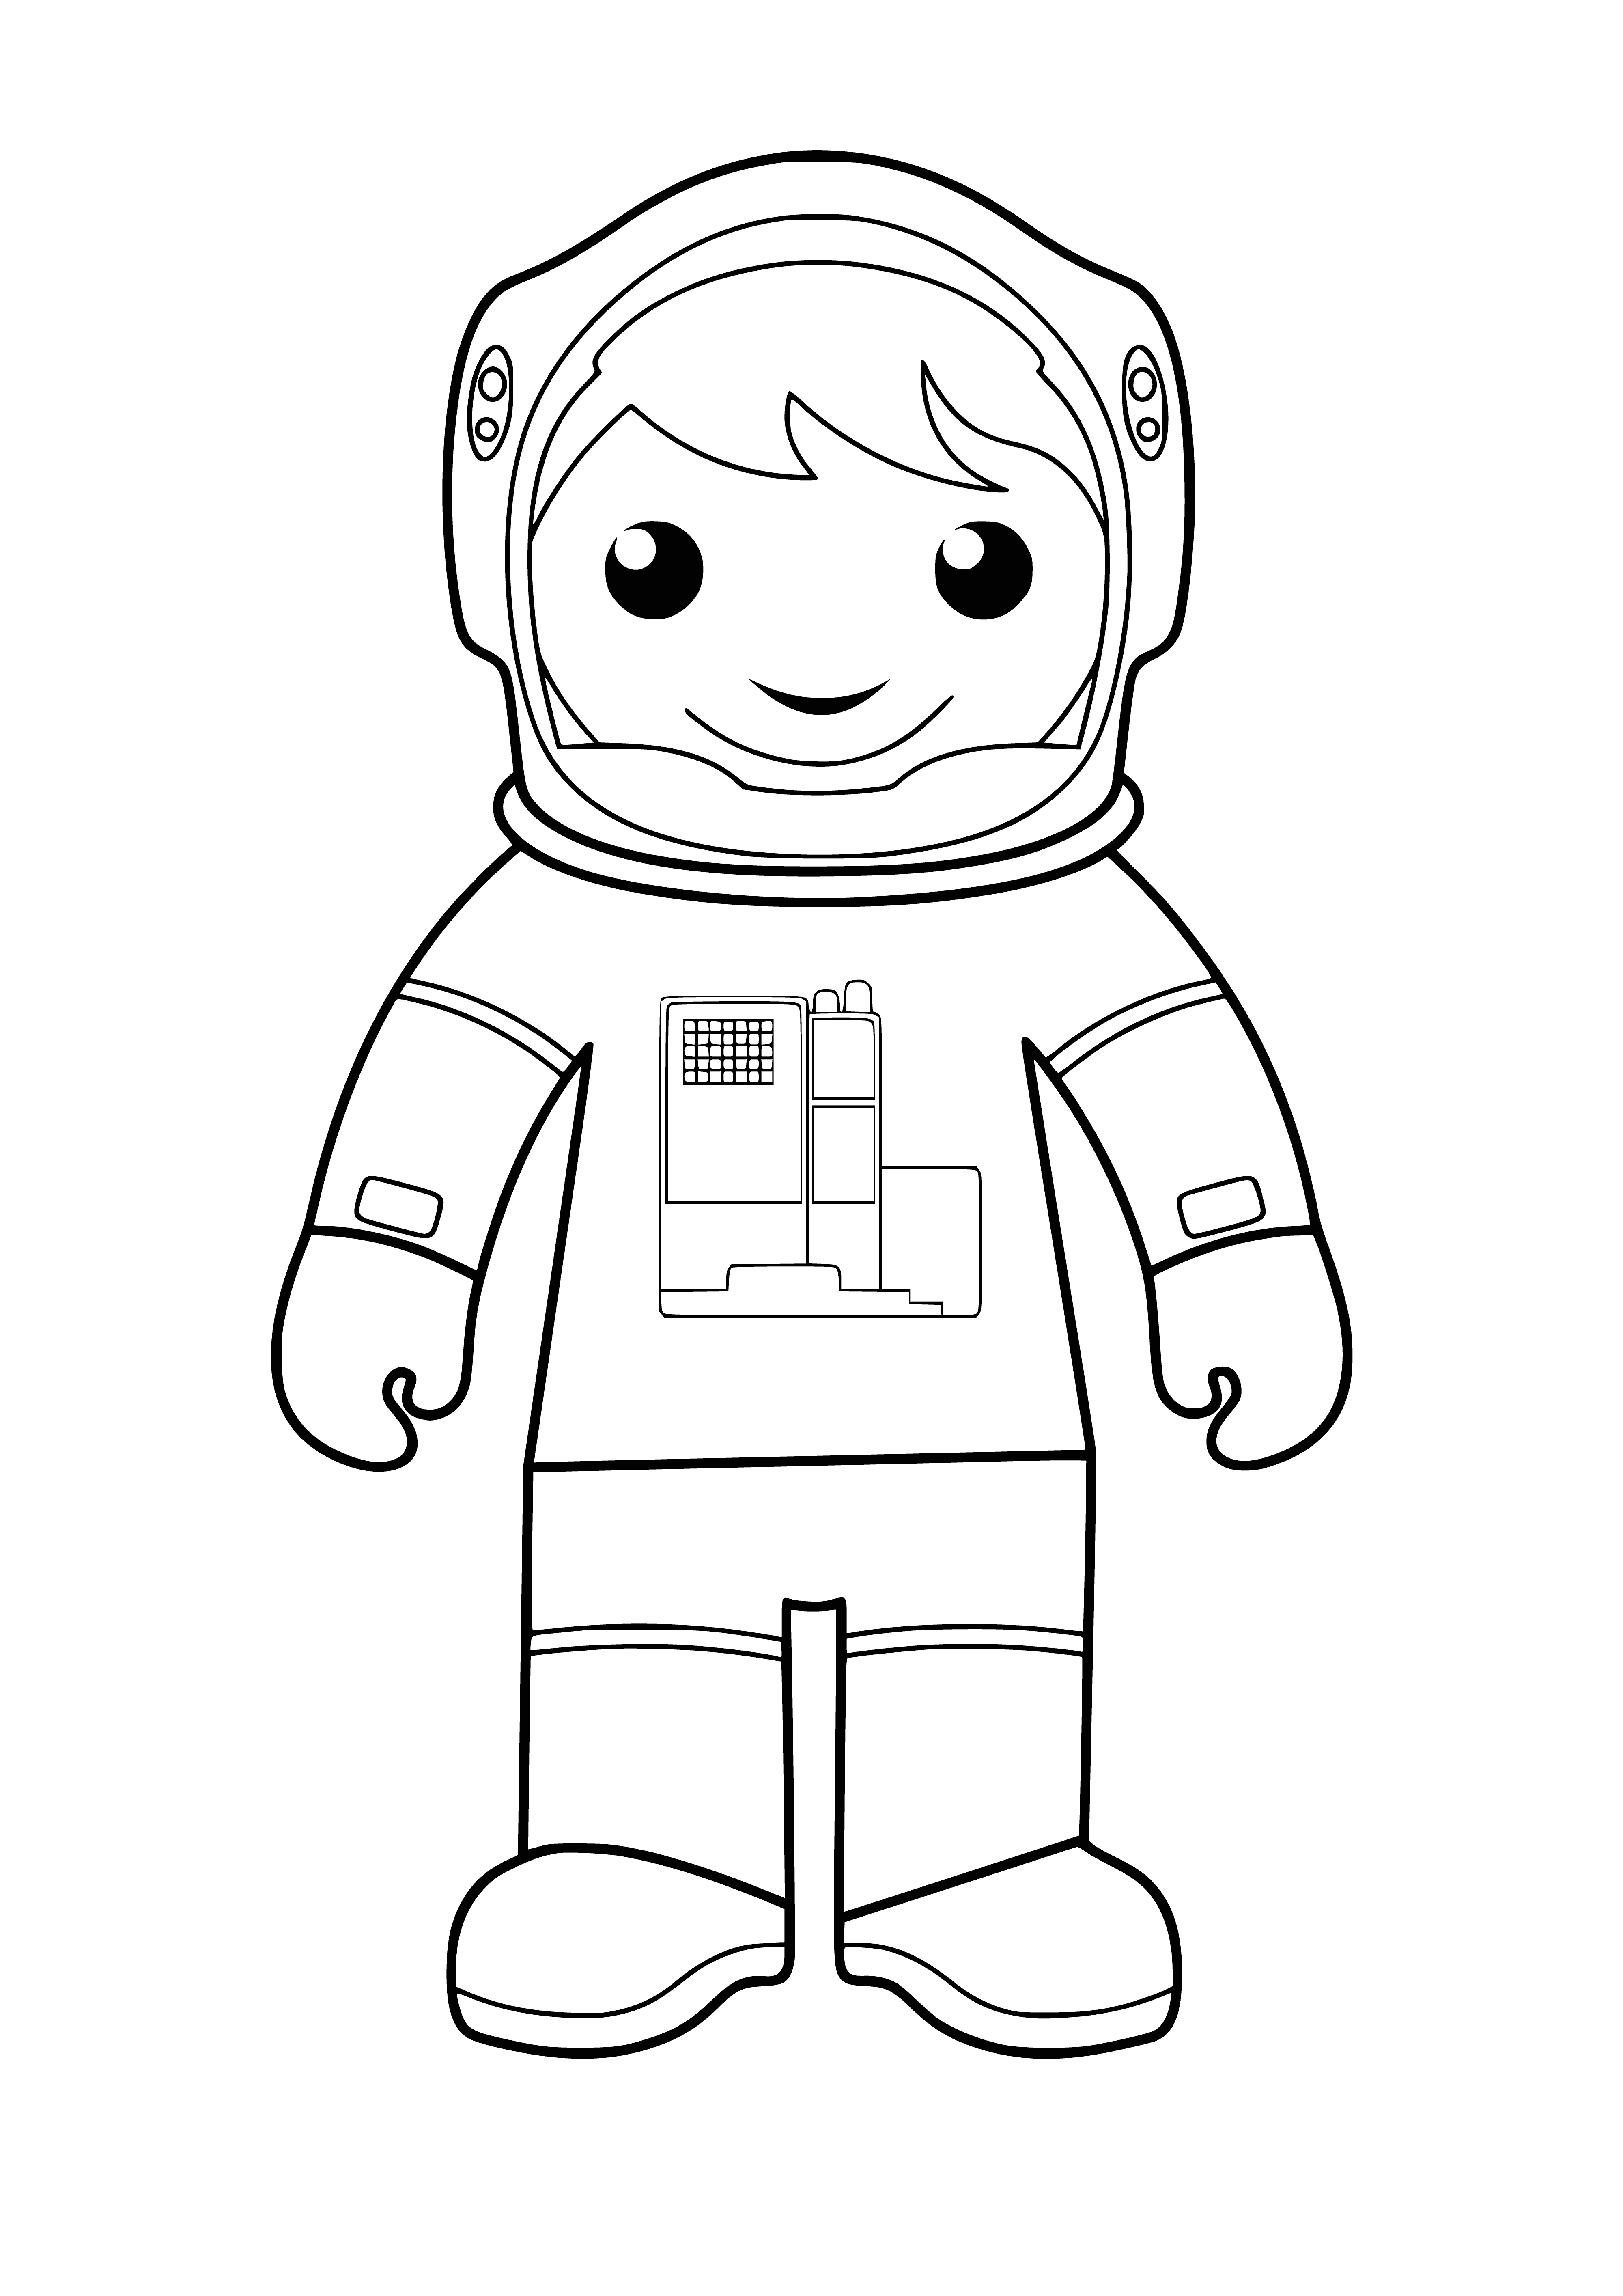 coloring page: Astronaut floating in zero gravity takes coloring page of beautiful blue-white Earth in space, surrounded by blackness.